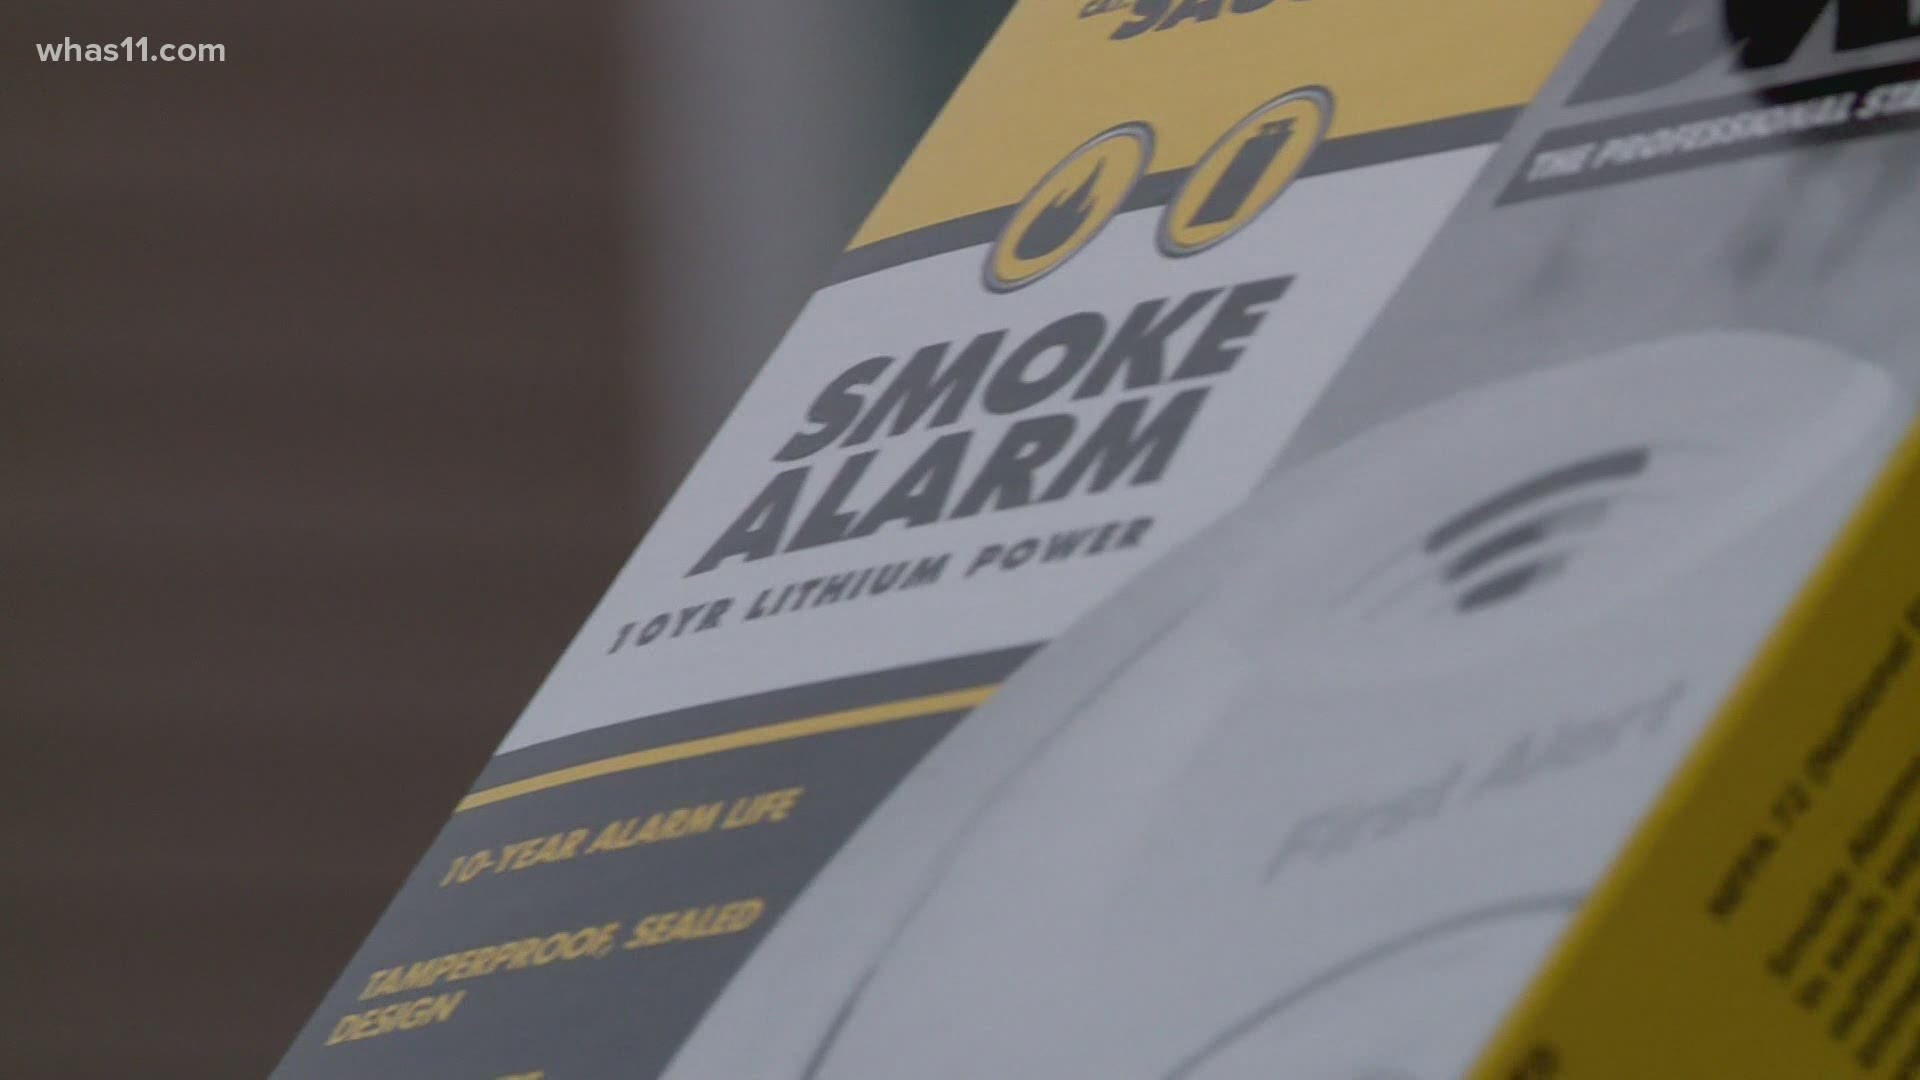 As the country begins to fall back, fire officials said it's a great time to check smoke and carbon monoxide detectors.